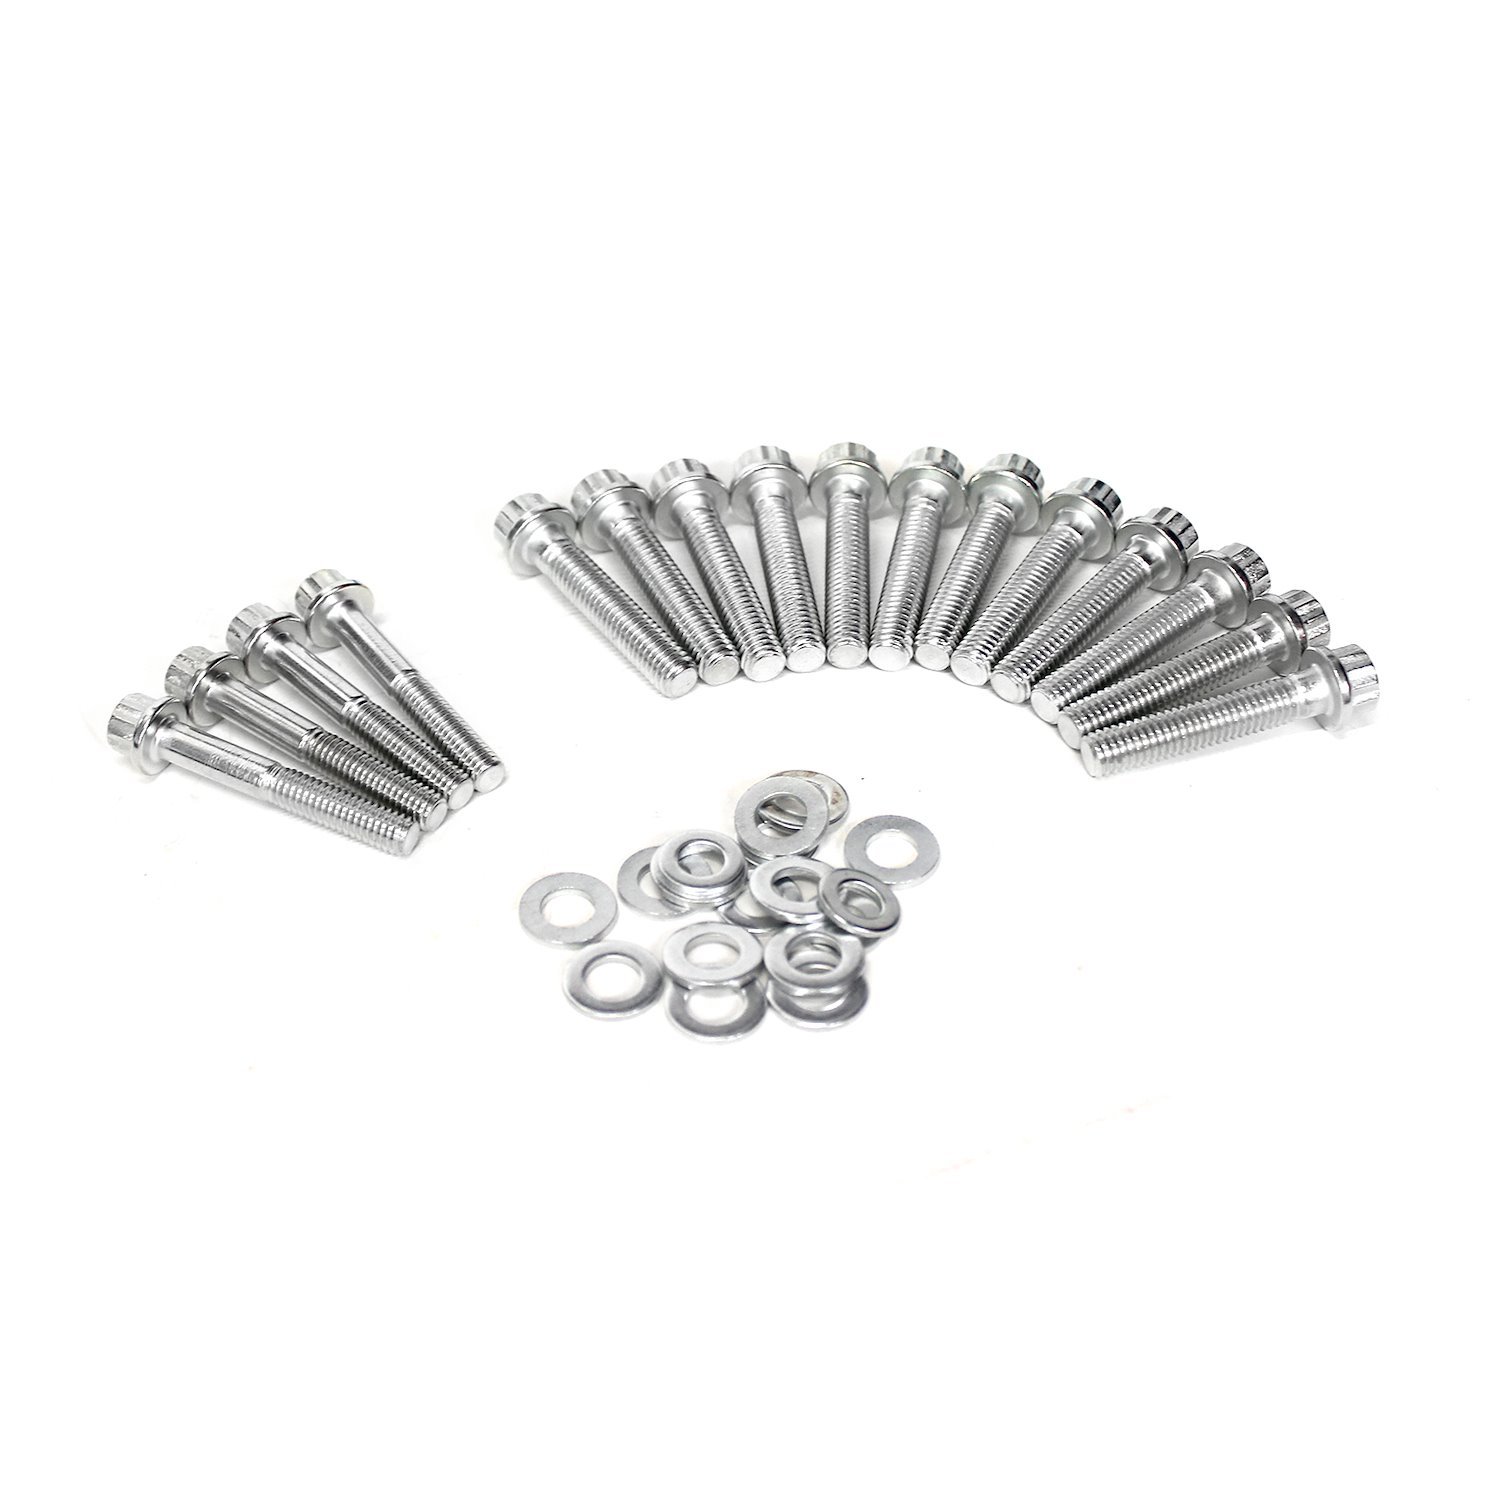 Intake Manifold Bolt Kit Ford 302/351C, 12-Point - Zinc-Plated